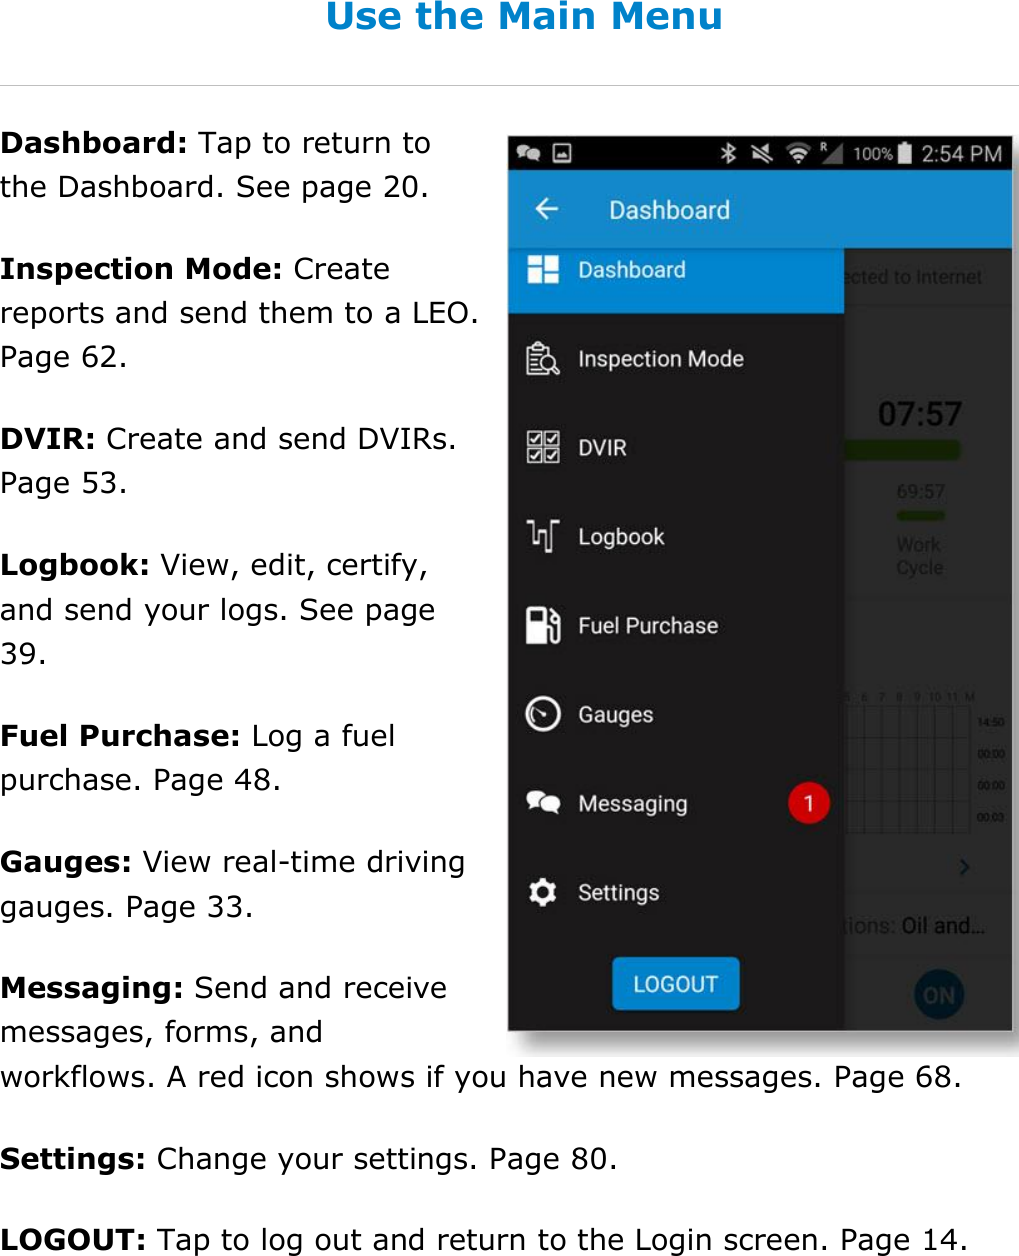 Set My Duty Status DriverConnect User Guide  25 © 2016-2017, Rand McNally, Inc. Use the Main Menu Dashboard: Tap to return to the Dashboard. See page 20. Inspection Mode: Create reports and send them to a LEO. Page 62. DVIR: Create and send DVIRs. Page 53. Logbook: View, edit, certify, and send your logs. See page 39. Fuel Purchase: Log a fuel purchase. Page 48. Gauges: View real-time driving gauges. Page 33. Messaging: Send and receive messages, forms, and workflows. A red icon shows if you have new messages. Page 68. Settings: Change your settings. Page 80. LOGOUT: Tap to log out and return to the Login screen. Page 14.   